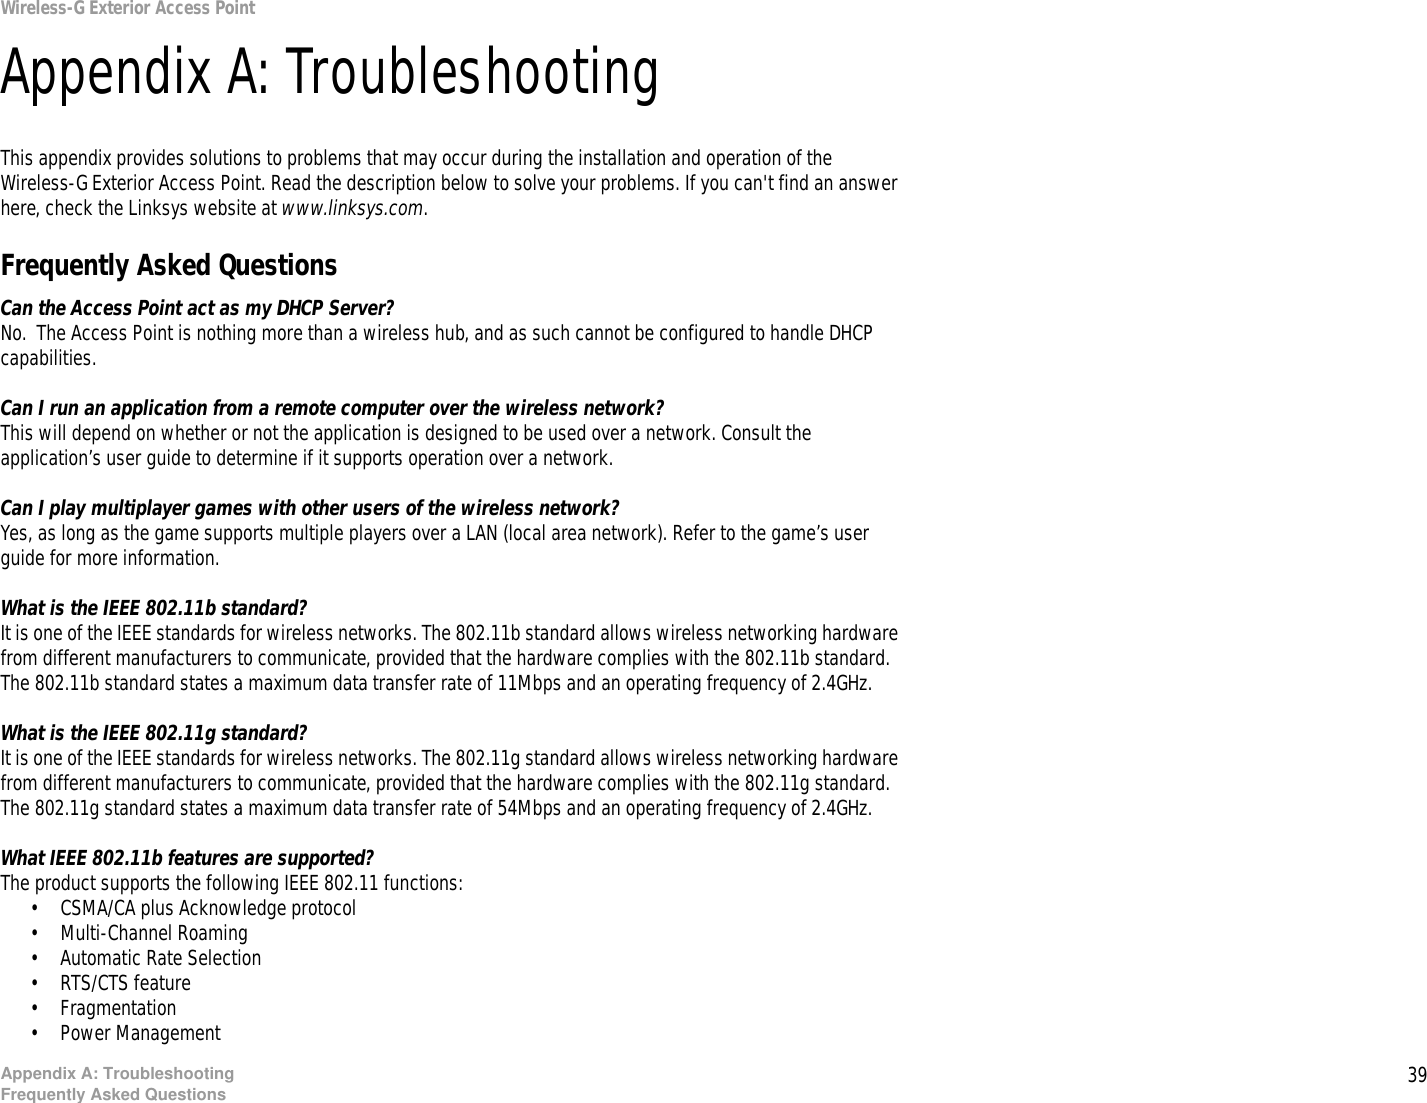 39Appendix A: TroubleshootingFrequently Asked QuestionsWireless-G Exterior Access PointAppendix A: TroubleshootingThis appendix provides solutions to problems that may occur during the installation and operation of the Wireless-G Exterior Access Point. Read the description below to solve your problems. If you can&apos;t find an answer here, check the Linksys website at www.linksys.com.Frequently Asked QuestionsCan the Access Point act as my DHCP Server?No.  The Access Point is nothing more than a wireless hub, and as such cannot be configured to handle DHCP capabilities.Can I run an application from a remote computer over the wireless network?This will depend on whether or not the application is designed to be used over a network. Consult the application’s user guide to determine if it supports operation over a network.Can I play multiplayer games with other users of the wireless network?Yes, as long as the game supports multiple players over a LAN (local area network). Refer to the game’s user guide for more information.What is the IEEE 802.11b standard?It is one of the IEEE standards for wireless networks. The 802.11b standard allows wireless networking hardware from different manufacturers to communicate, provided that the hardware complies with the 802.11b standard. The 802.11b standard states a maximum data transfer rate of 11Mbps and an operating frequency of 2.4GHz.What is the IEEE 802.11g standard?It is one of the IEEE standards for wireless networks. The 802.11g standard allows wireless networking hardware from different manufacturers to communicate, provided that the hardware complies with the 802.11g standard. The 802.11g standard states a maximum data transfer rate of 54Mbps and an operating frequency of 2.4GHz.What IEEE 802.11b features are supported?The product supports the following IEEE 802.11 functions: • CSMA/CA plus Acknowledge protocol • Multi-Channel Roaming • Automatic Rate Selection • RTS/CTS feature • Fragmentation • Power Management  